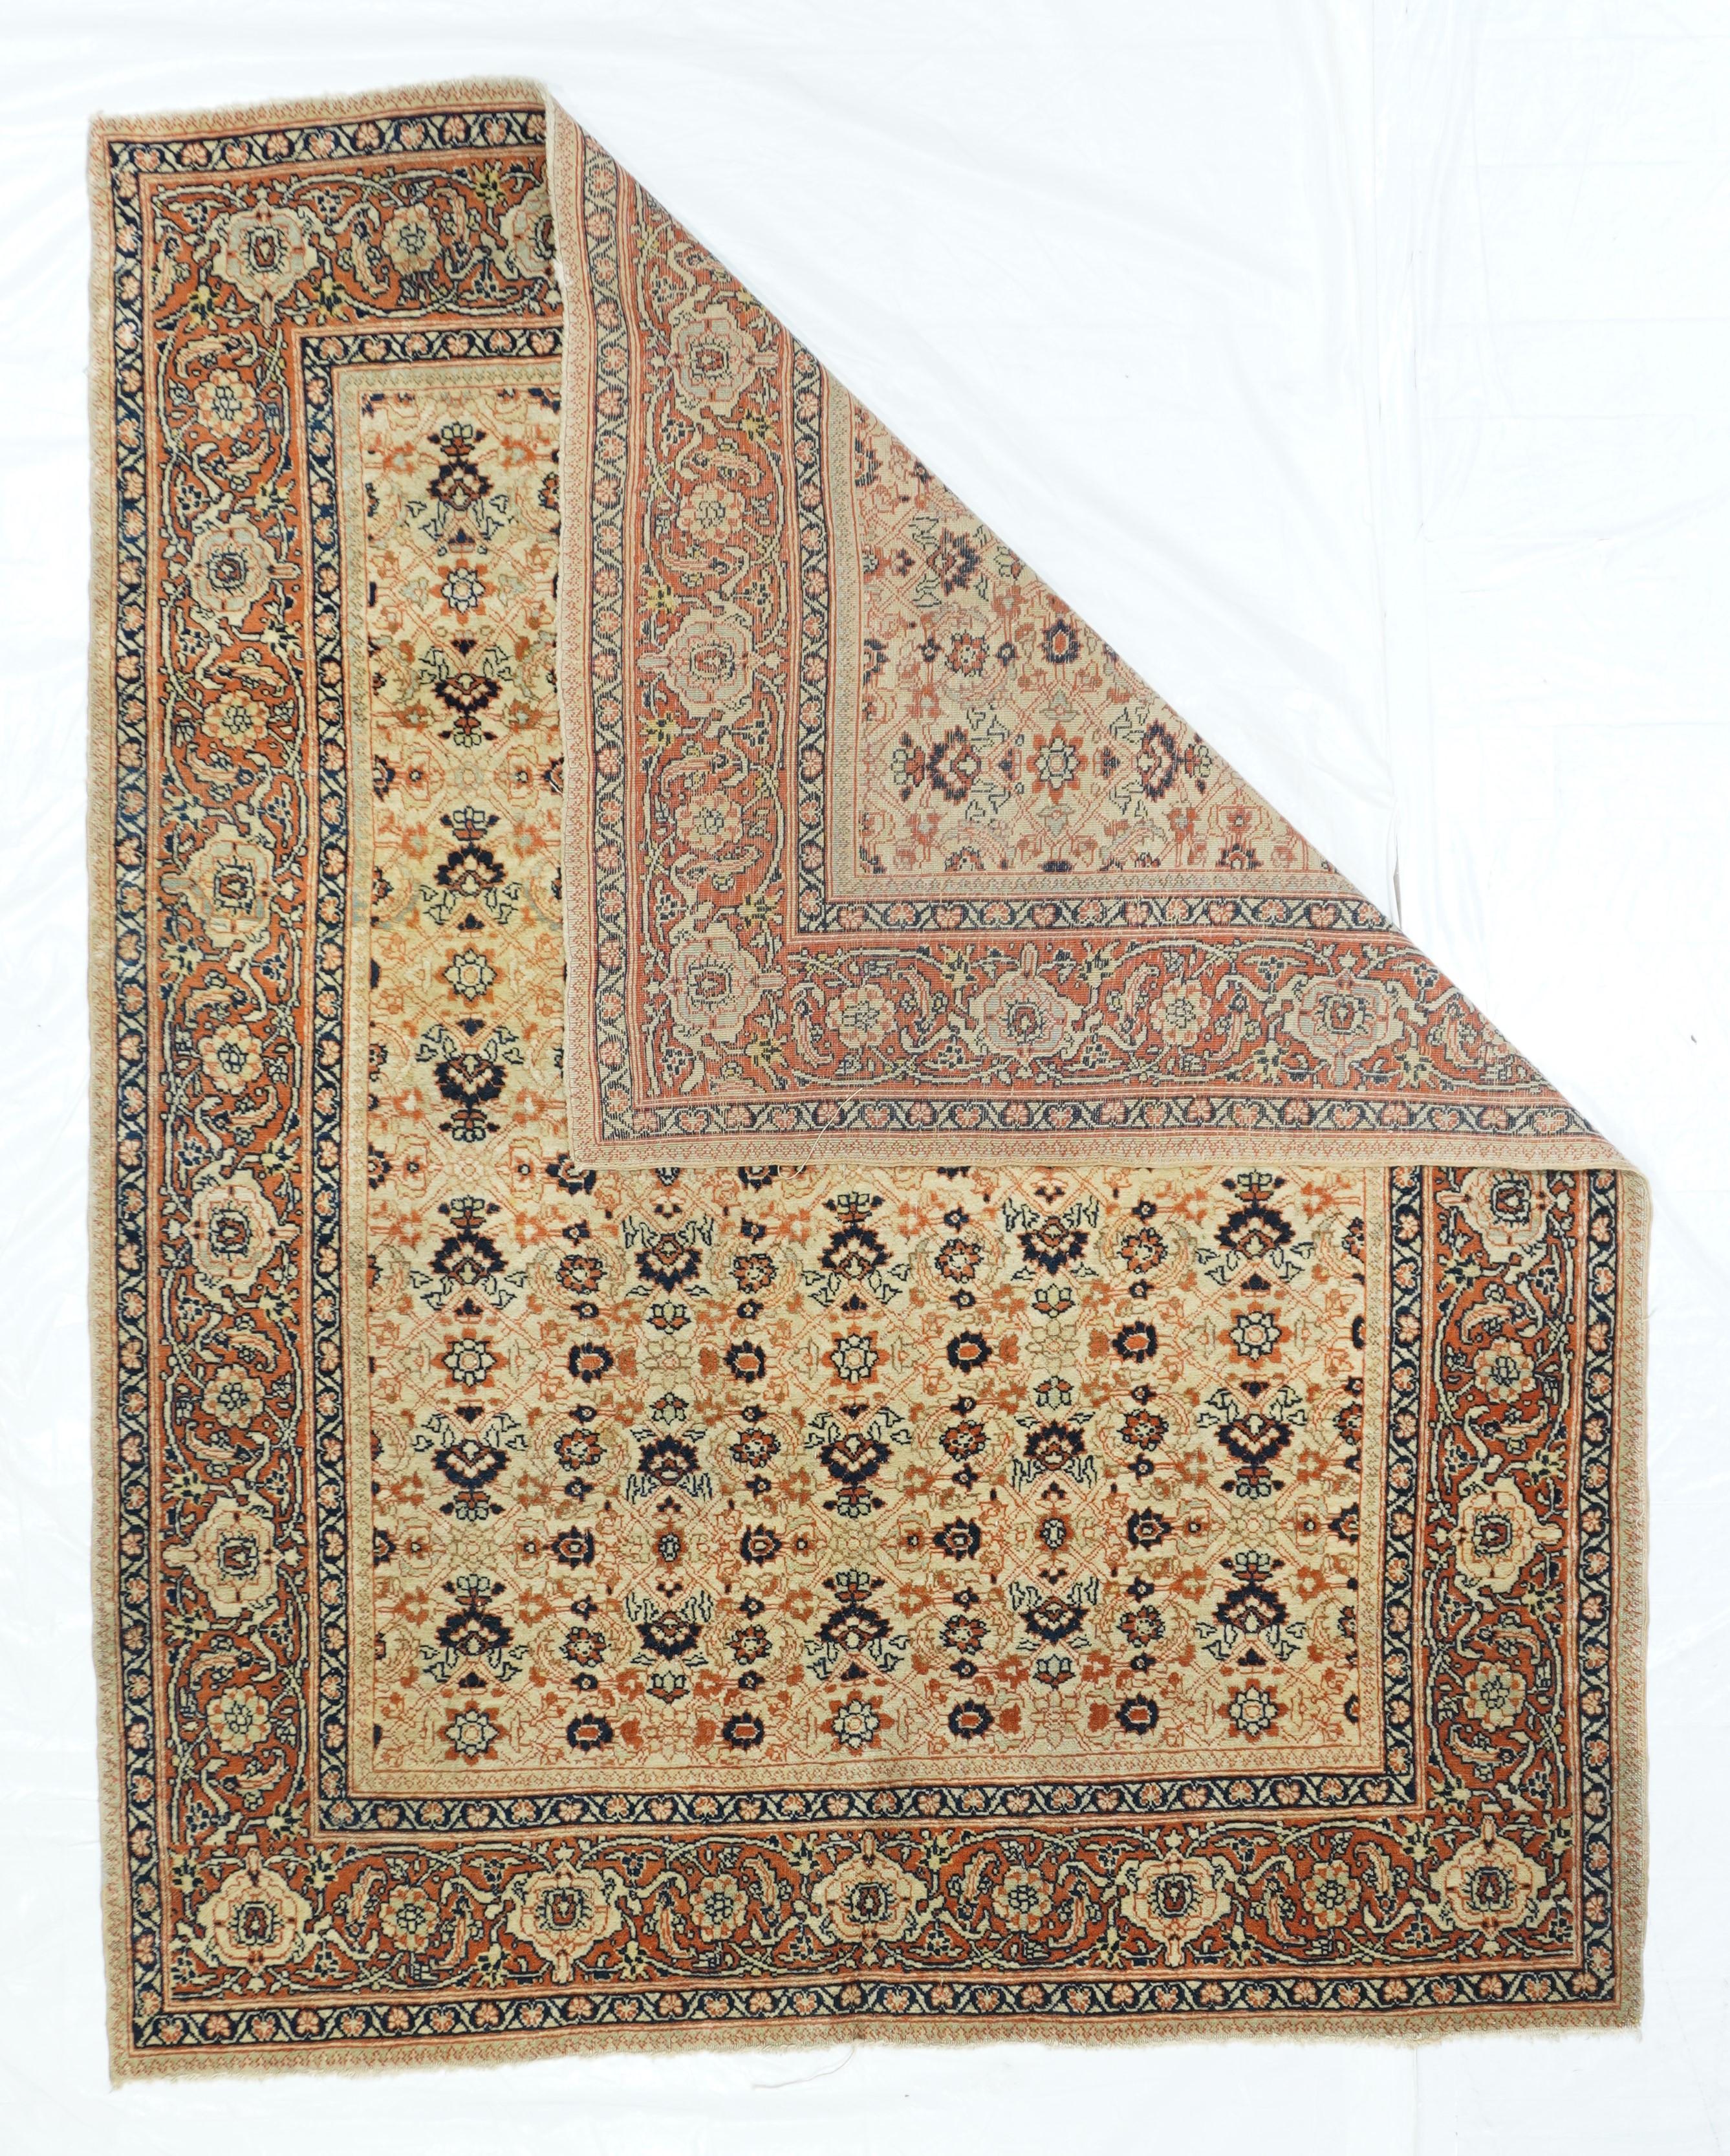 Antique Tabriz Haji Jalili Rug 4'2'' x 5'3'' In Excellent Condition For Sale In New York, NY